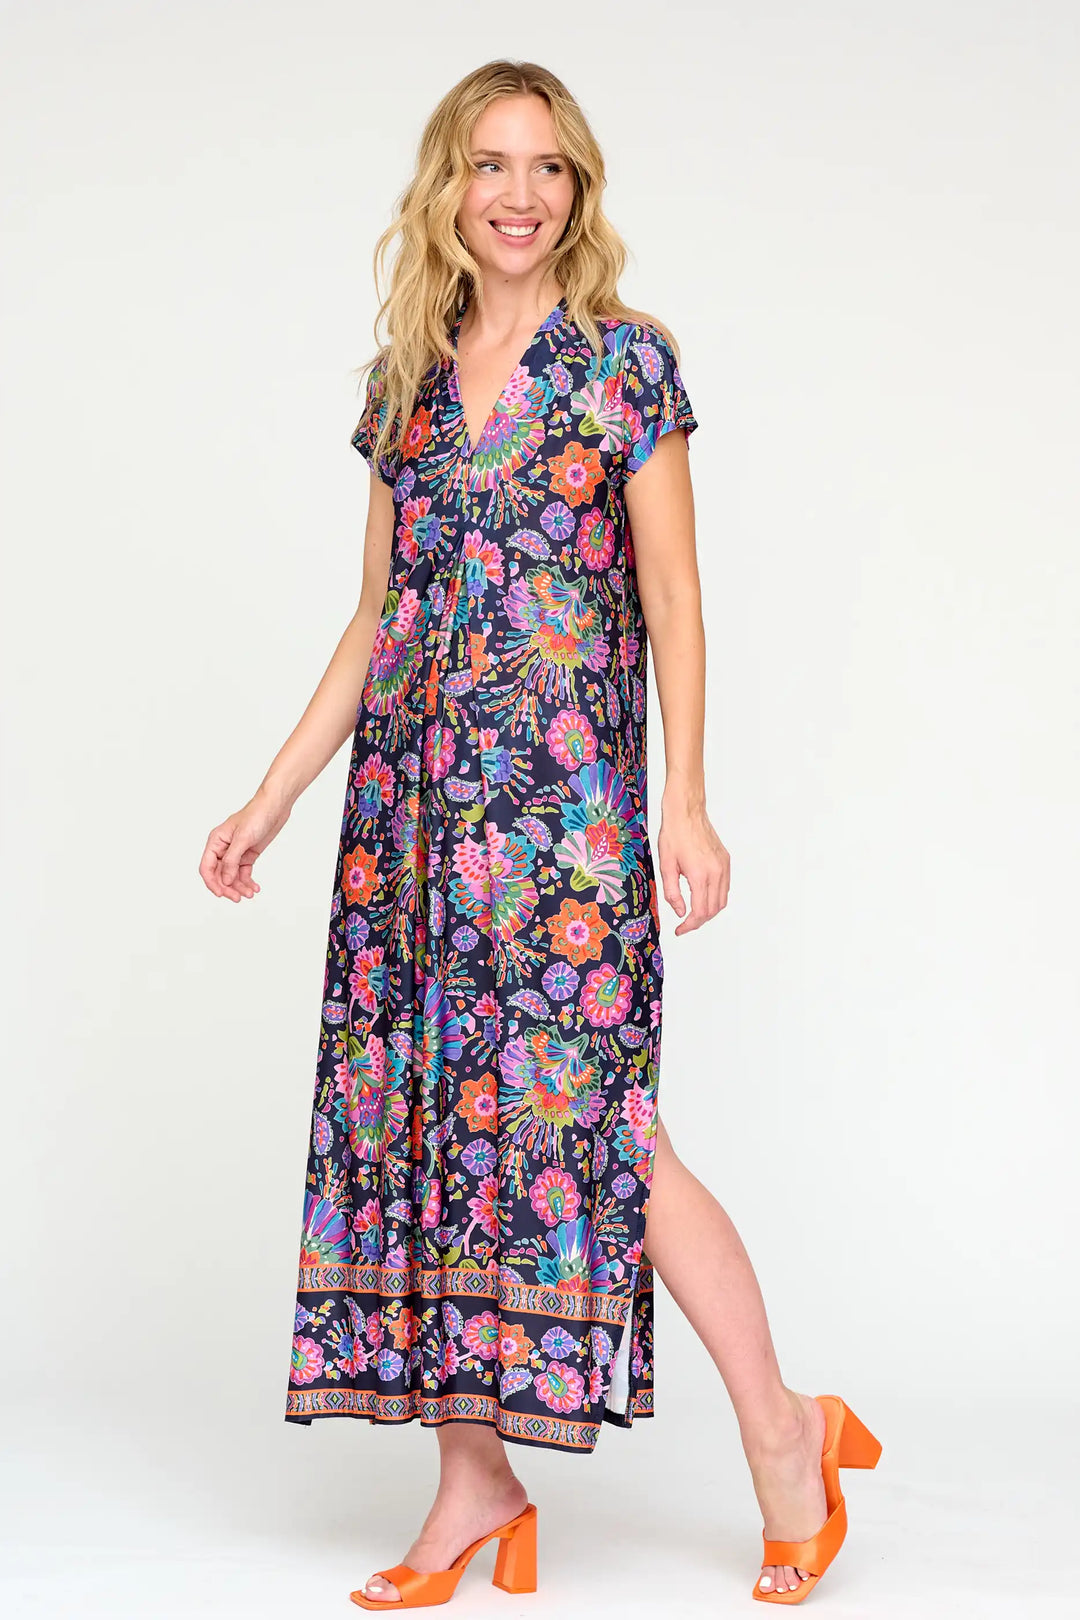 Beaming model in 'Aleli' style navy maxi dress with vibrant pink, purple, and orange floral print, V-neck, short sleeves, and tiered skirt, complemented by bright orange block heel sandals.